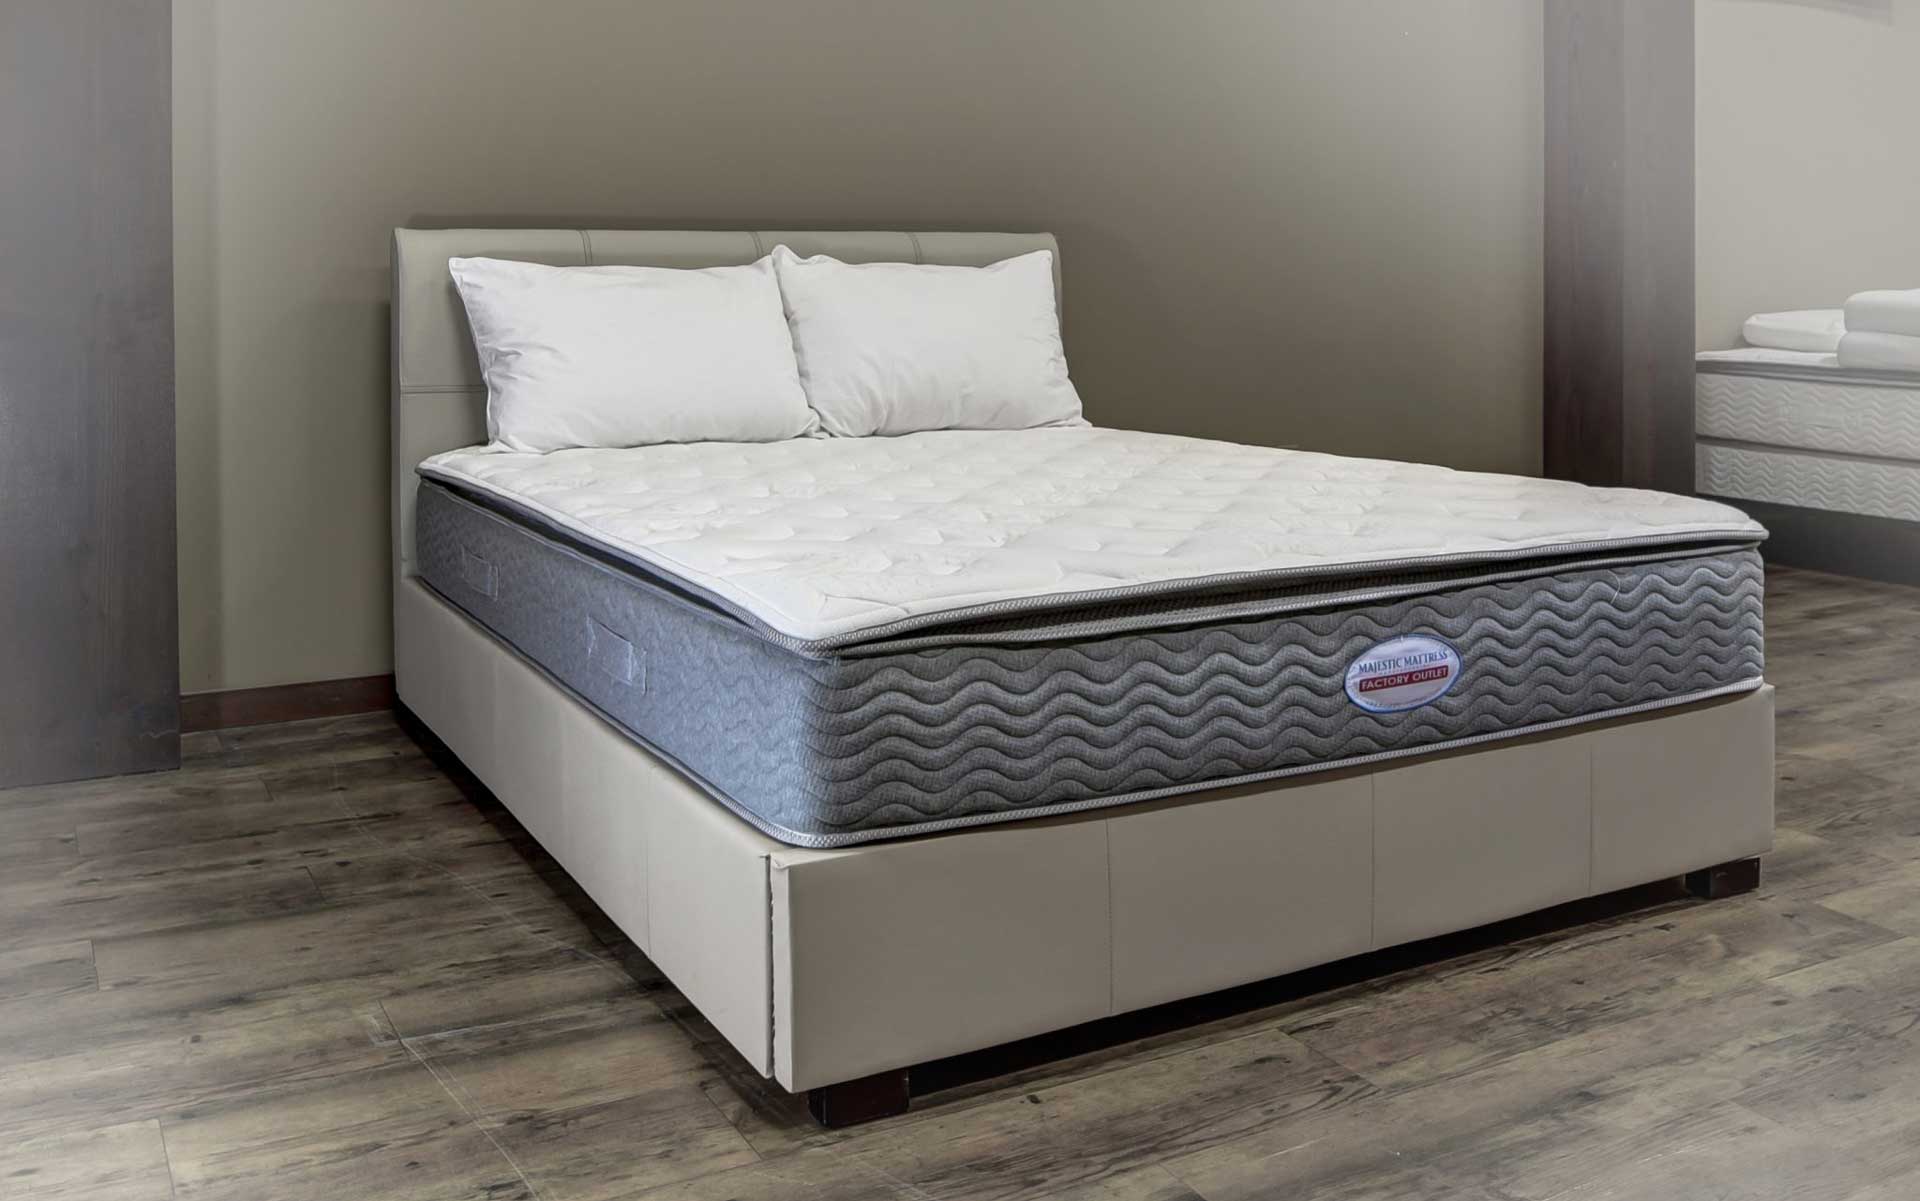 Find Mattresses in Lake Forest California